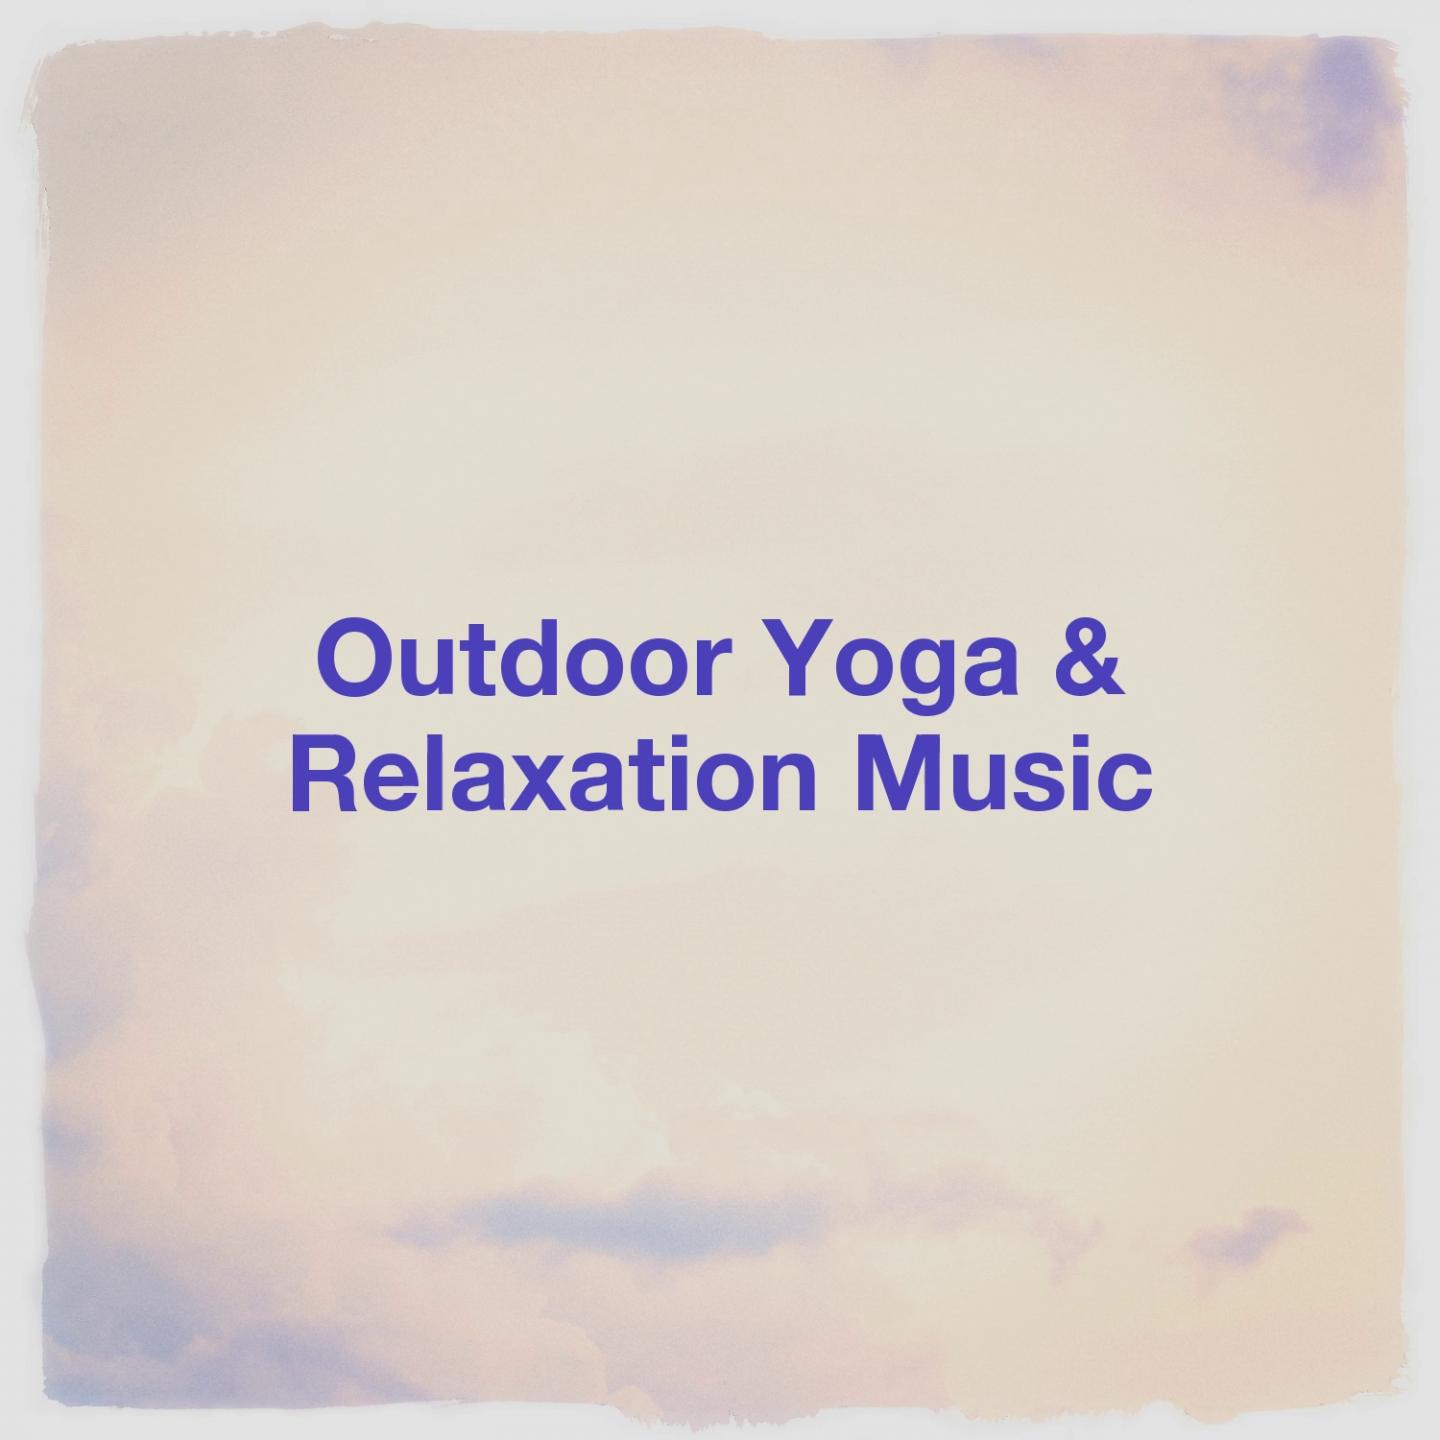 Outdoor Yoga & Relaxation Music